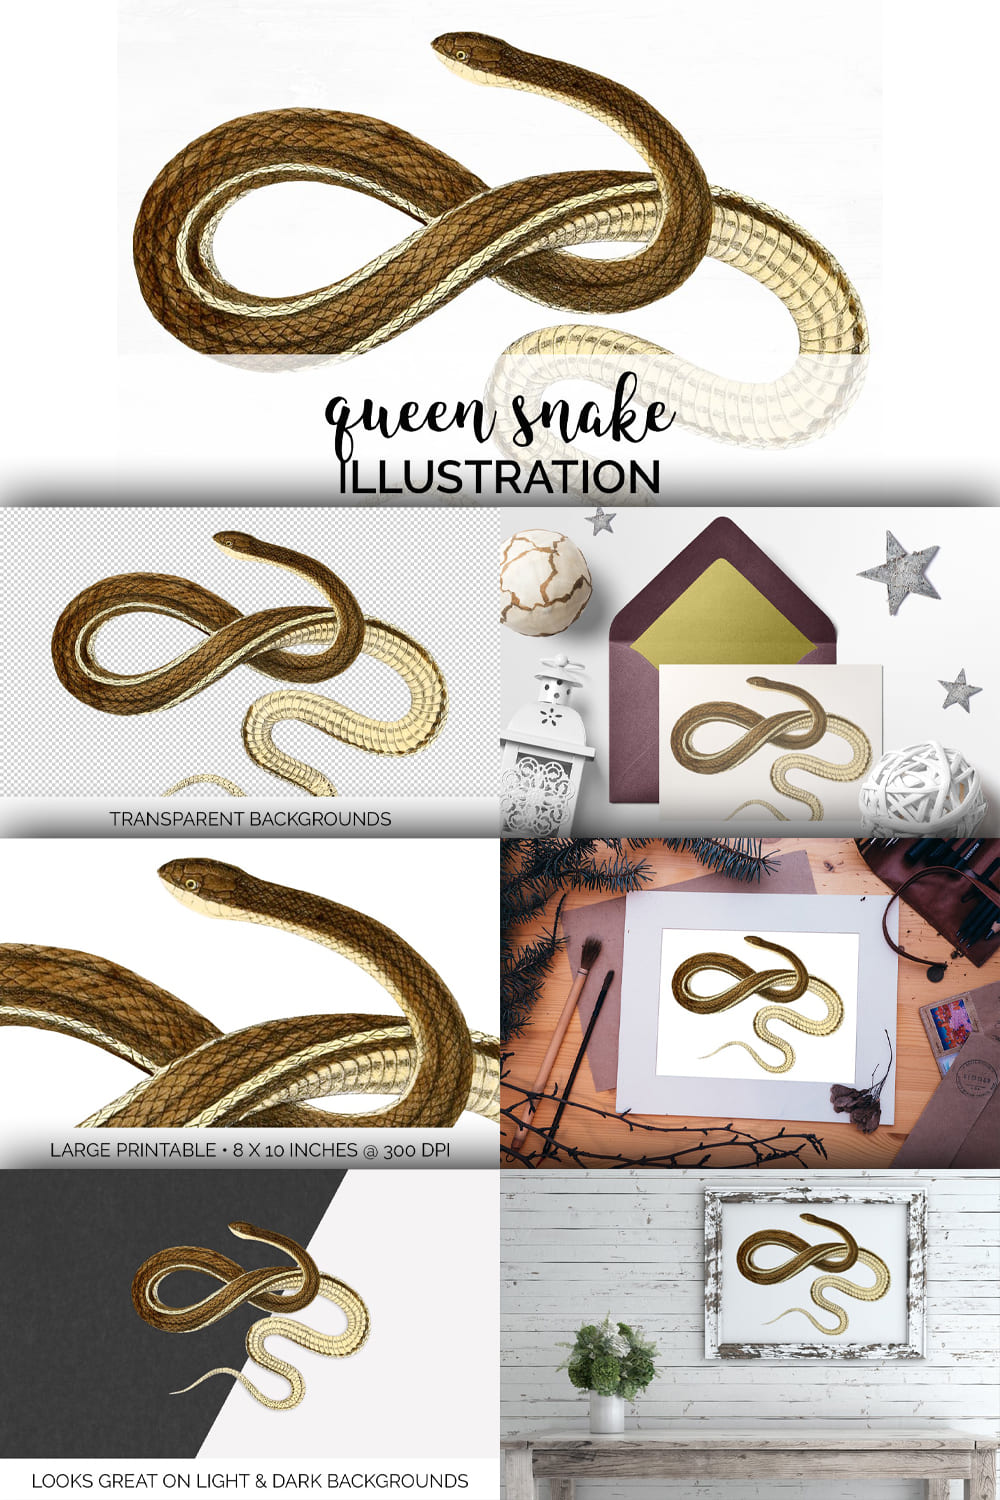 Colorful images of an enchanting queen snake.